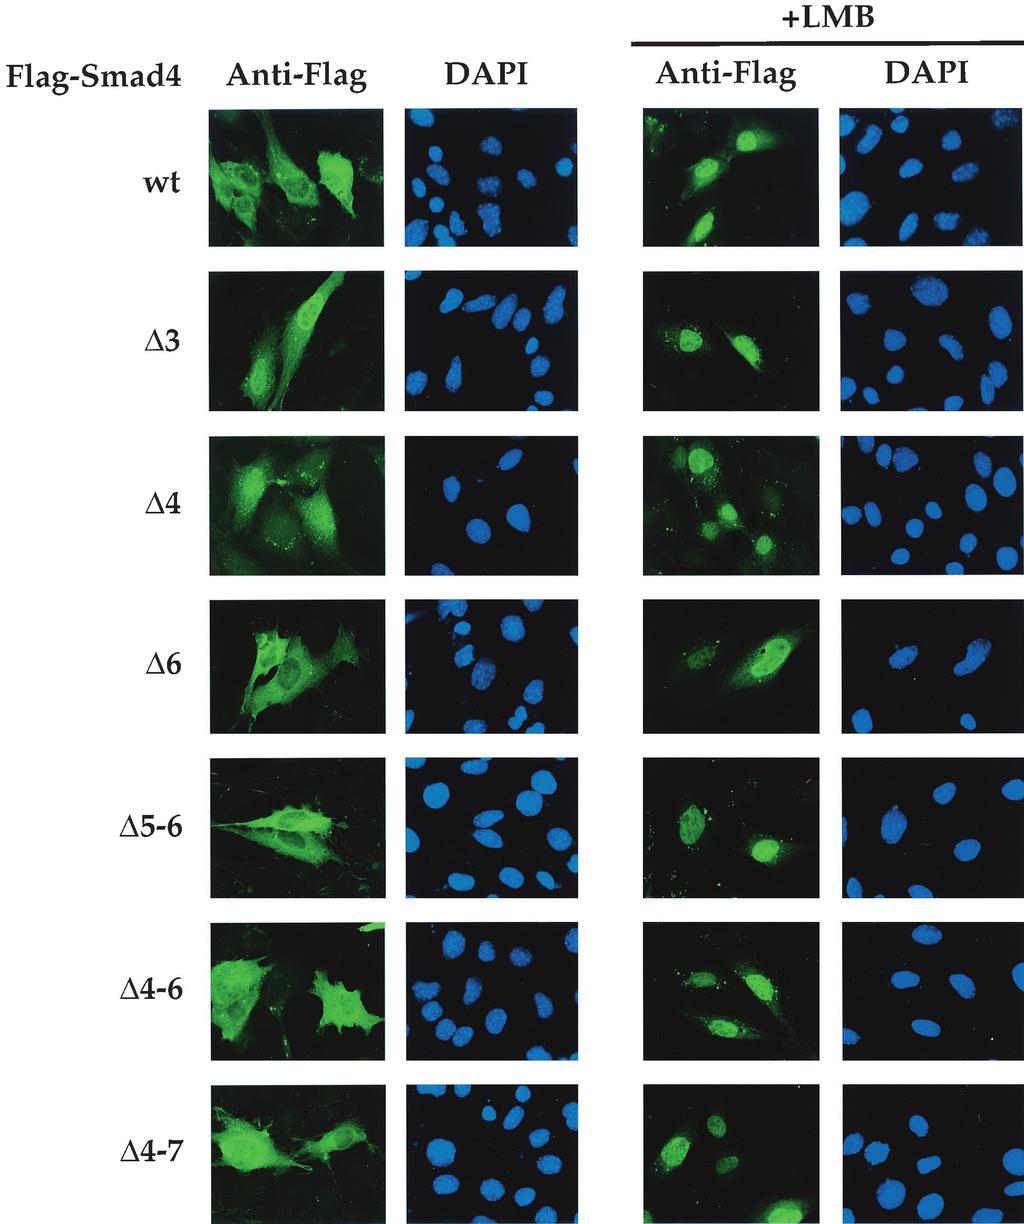 VOL. 20, 2000 NUCLEOCYTOPLASMIC SHUTTLING OF Smad4 9047 FIG. 4. Subcellular localization of the alternatively spliced Smad4 variants in the absence and presence of LMB.